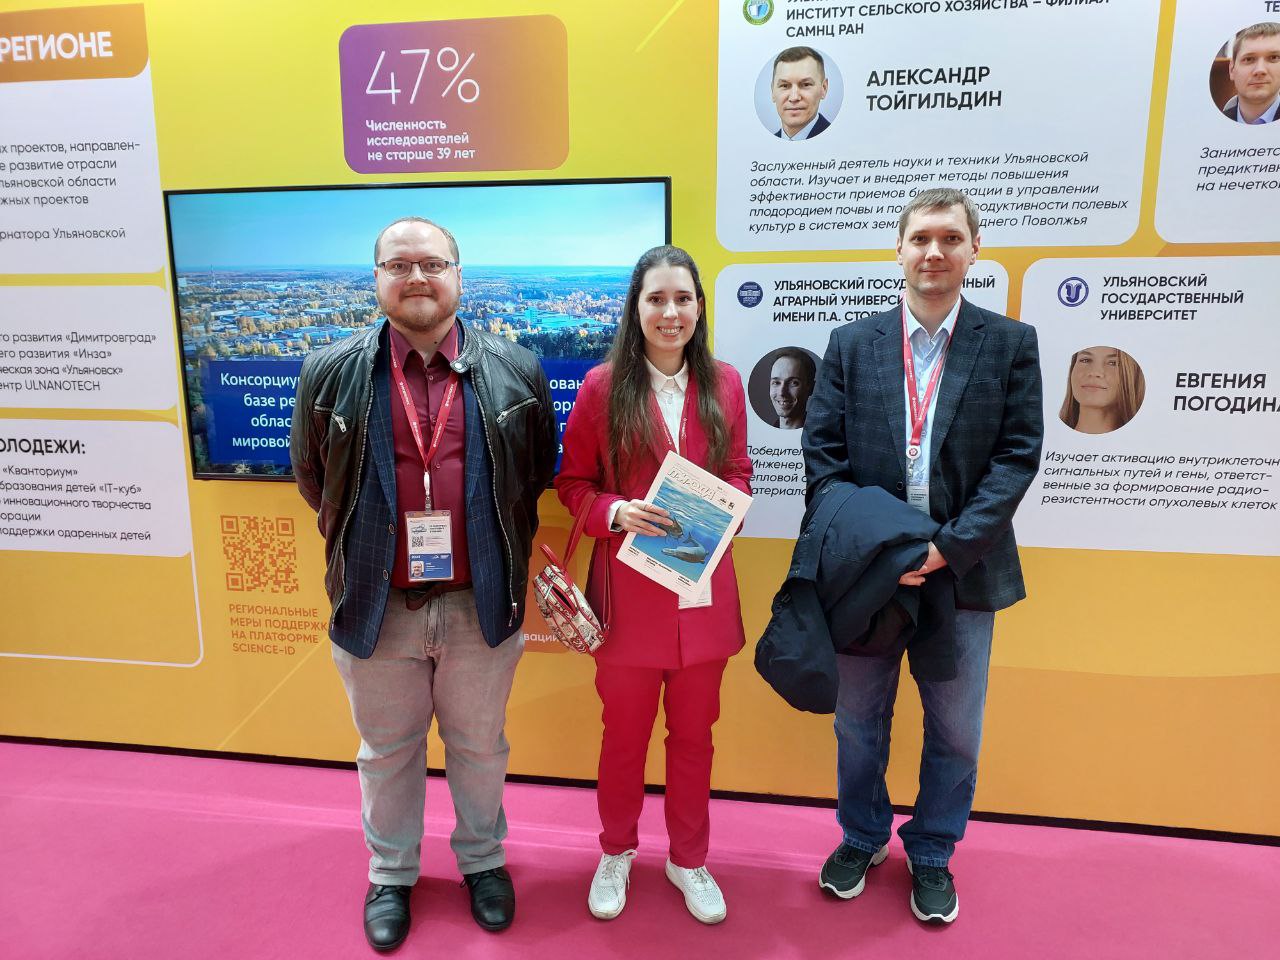 Representatives of UlSTU take part in the Congress of Young Scientists in Sochi